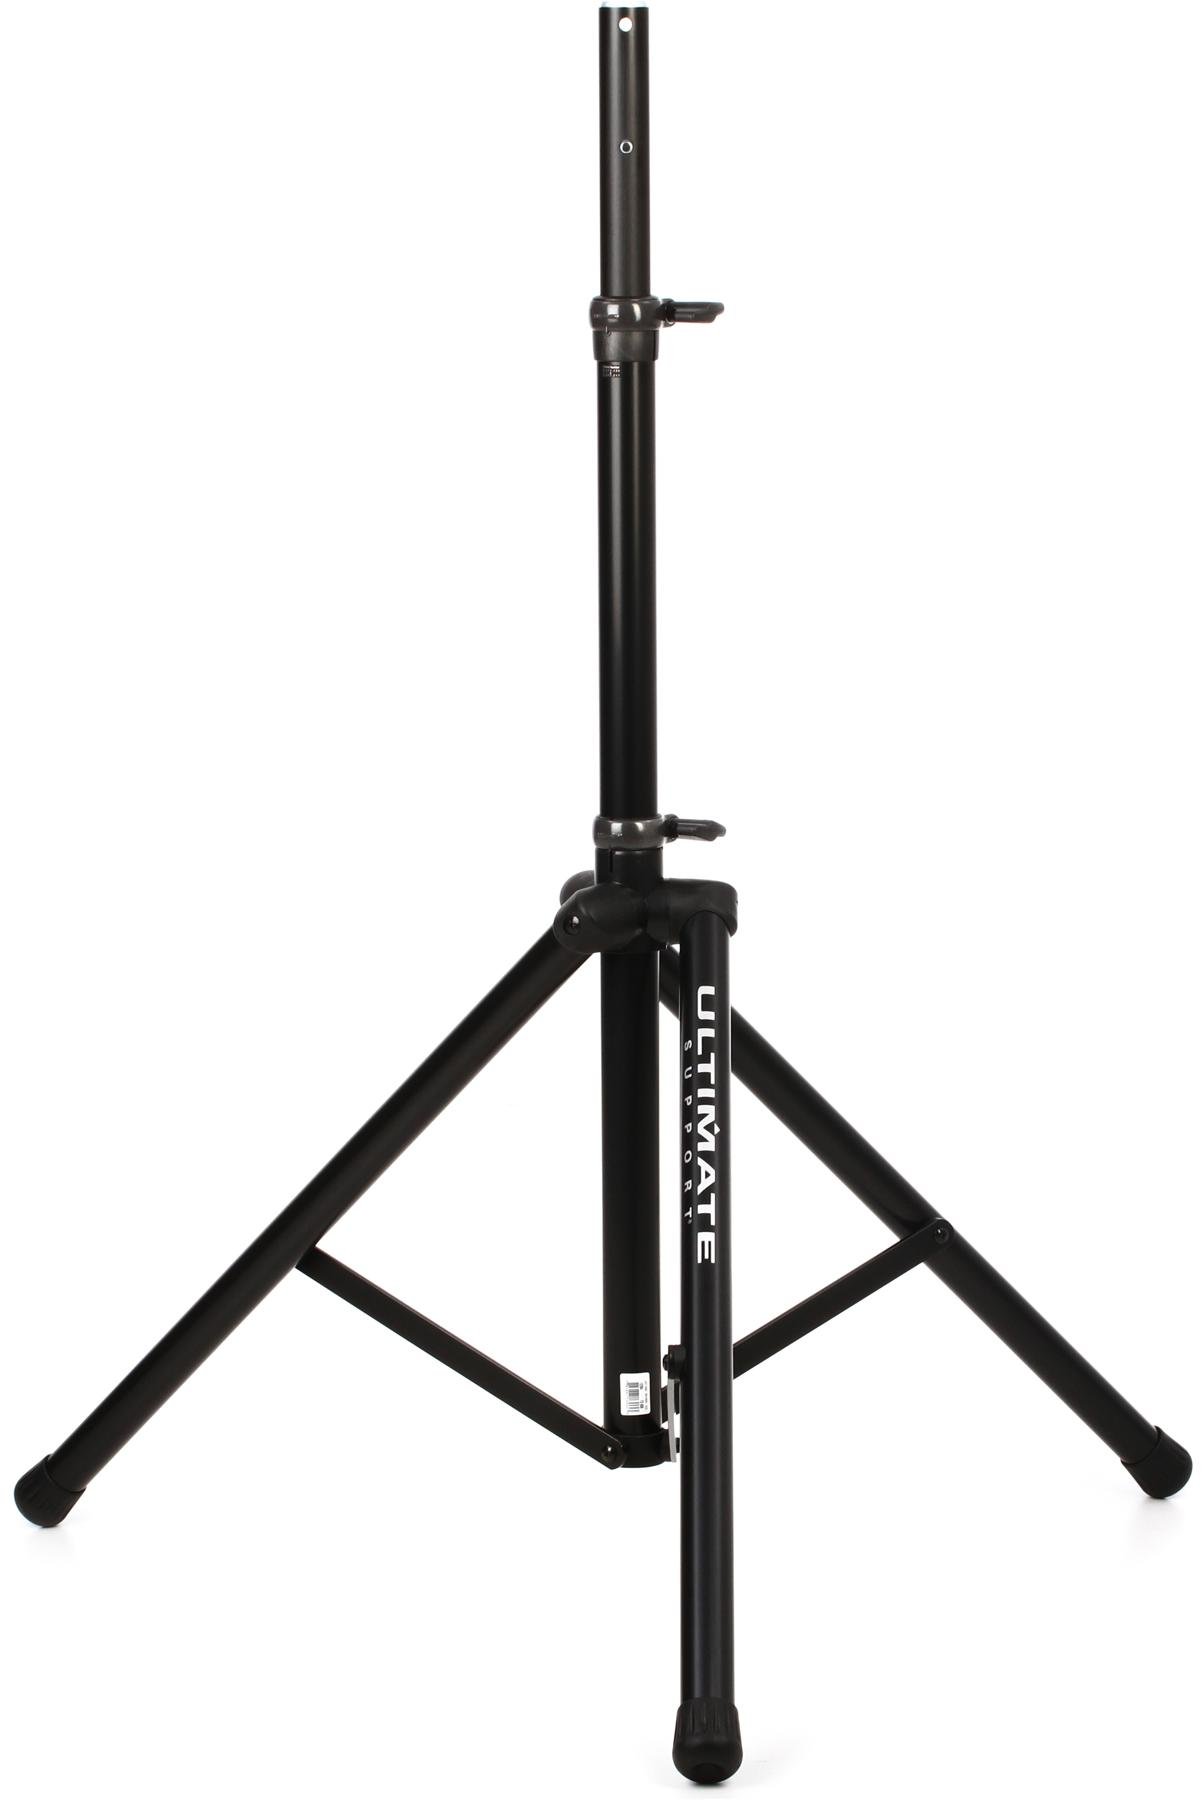 ultimate support bike stand